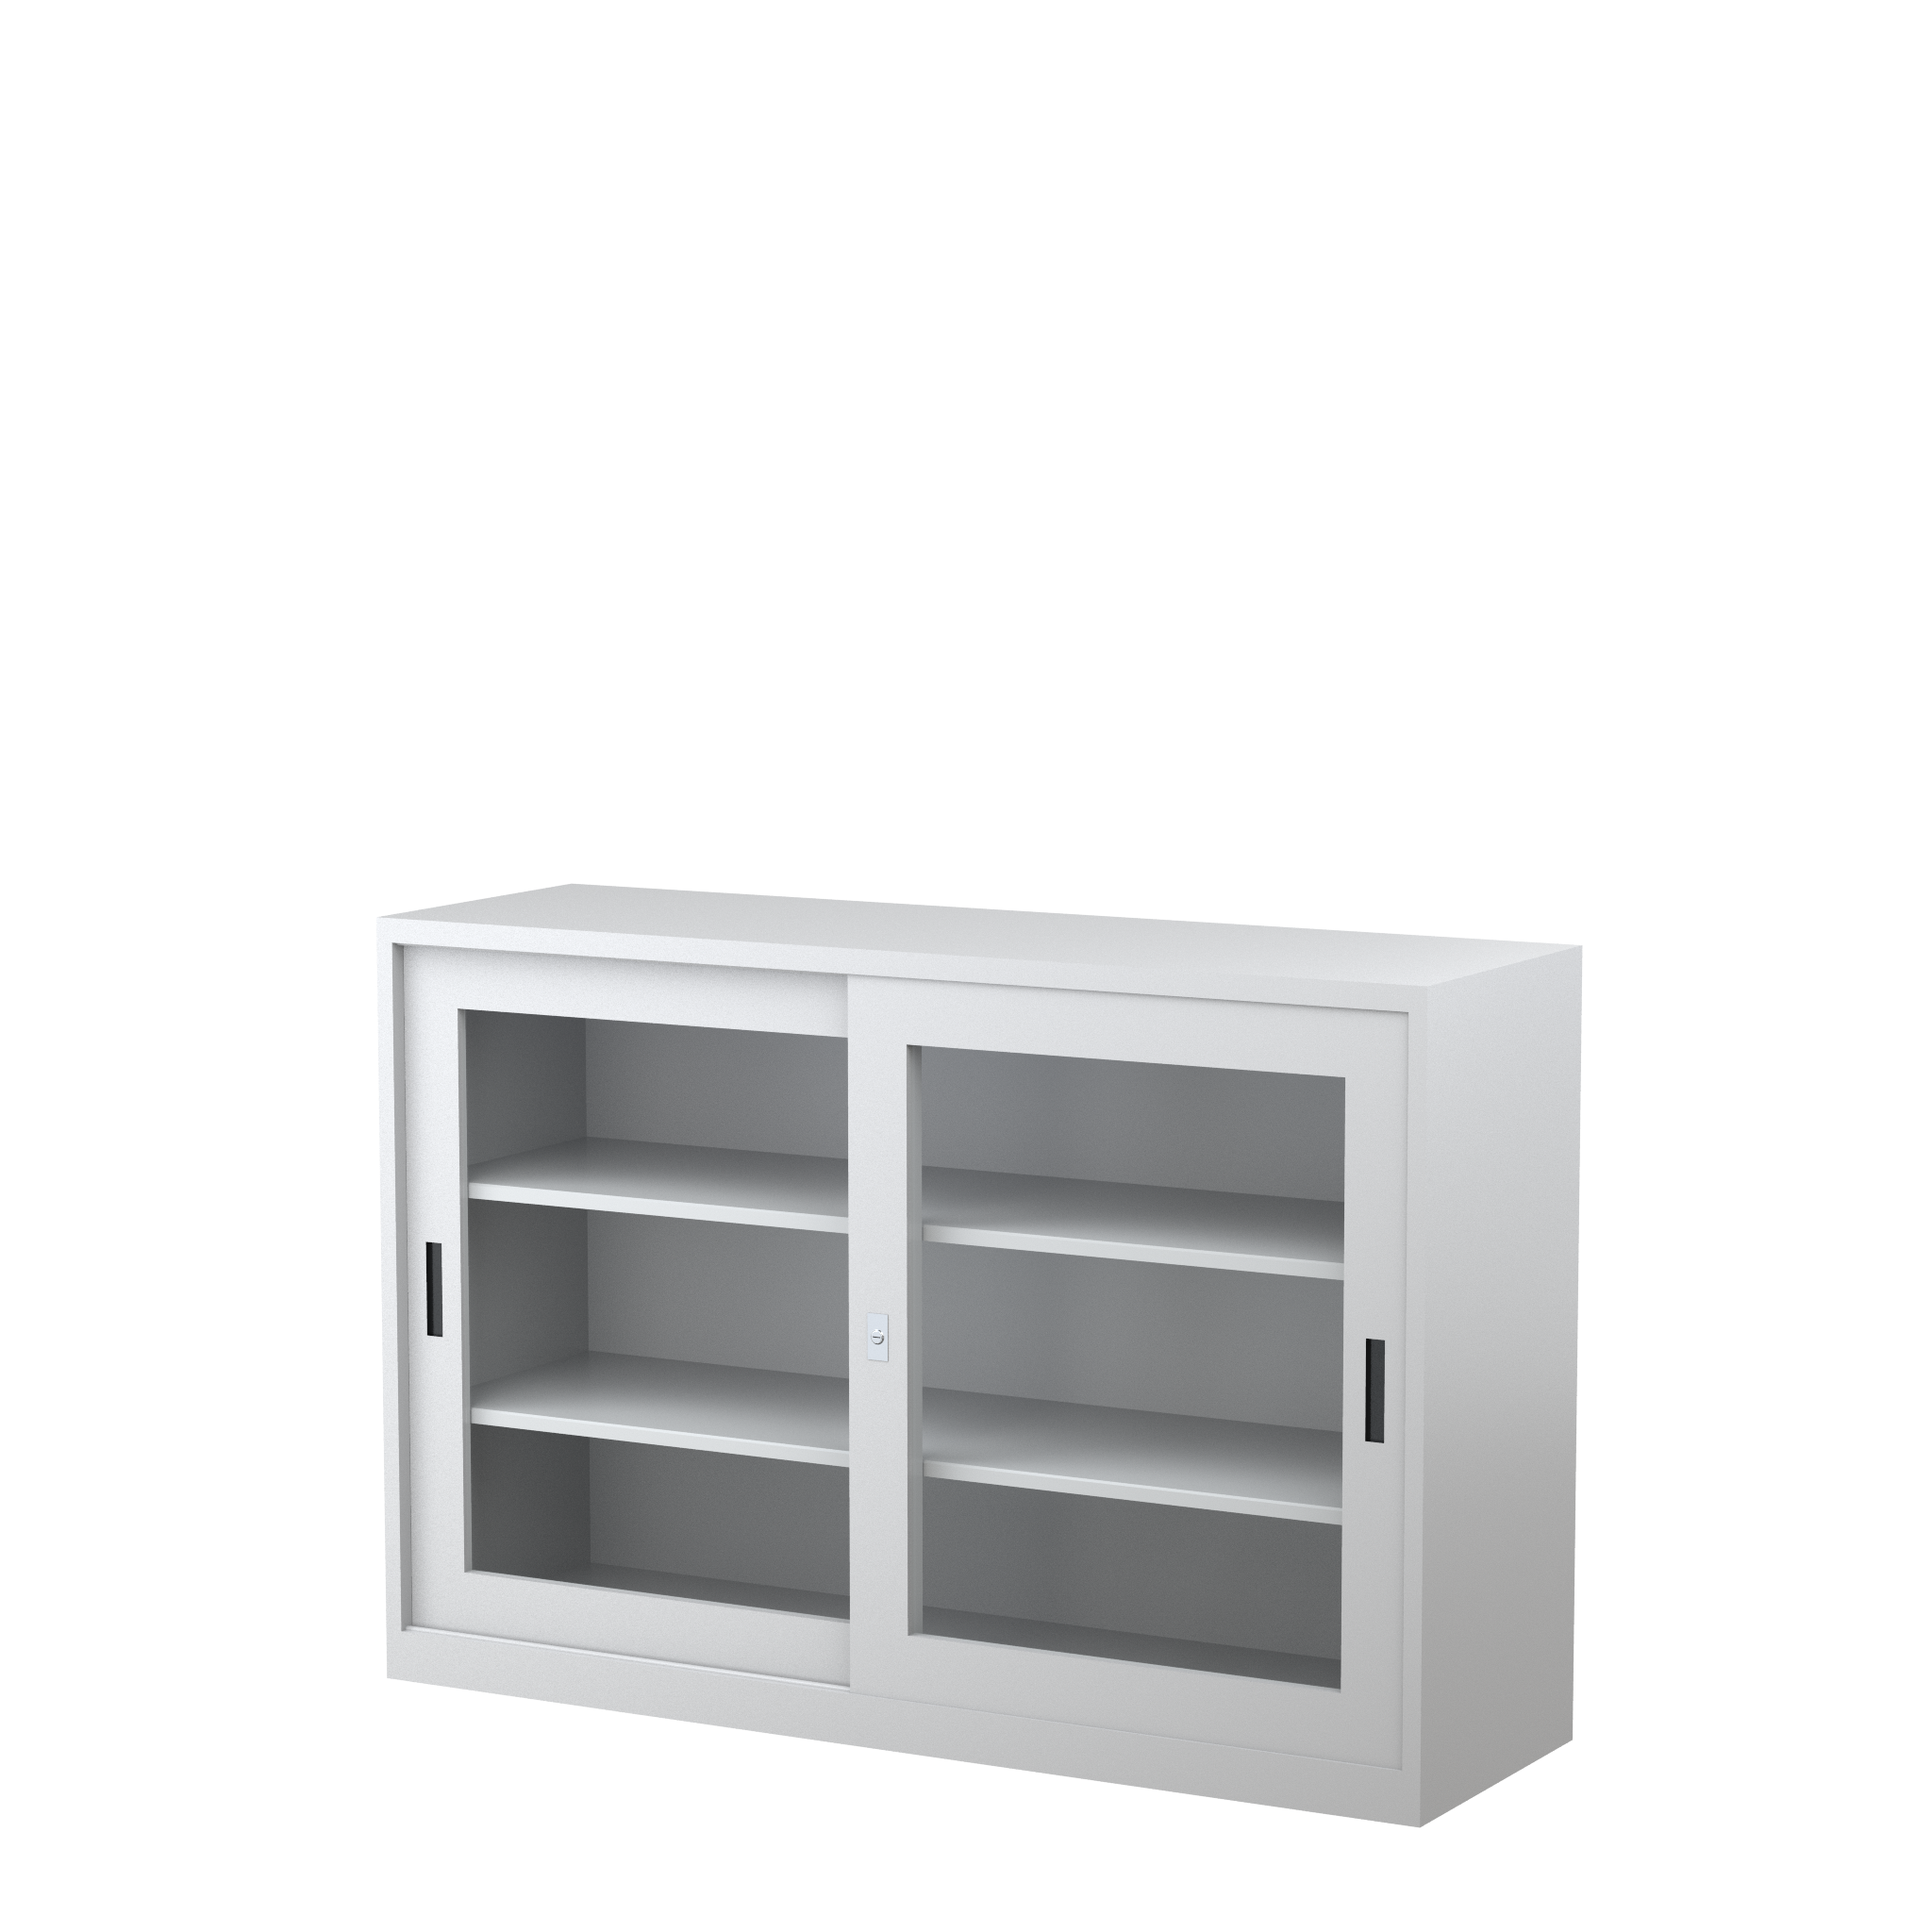 GD1015_1500 - STEELCO SG Cabinet 1015H x 1500W x 465D - 2 Shelves-WS.png